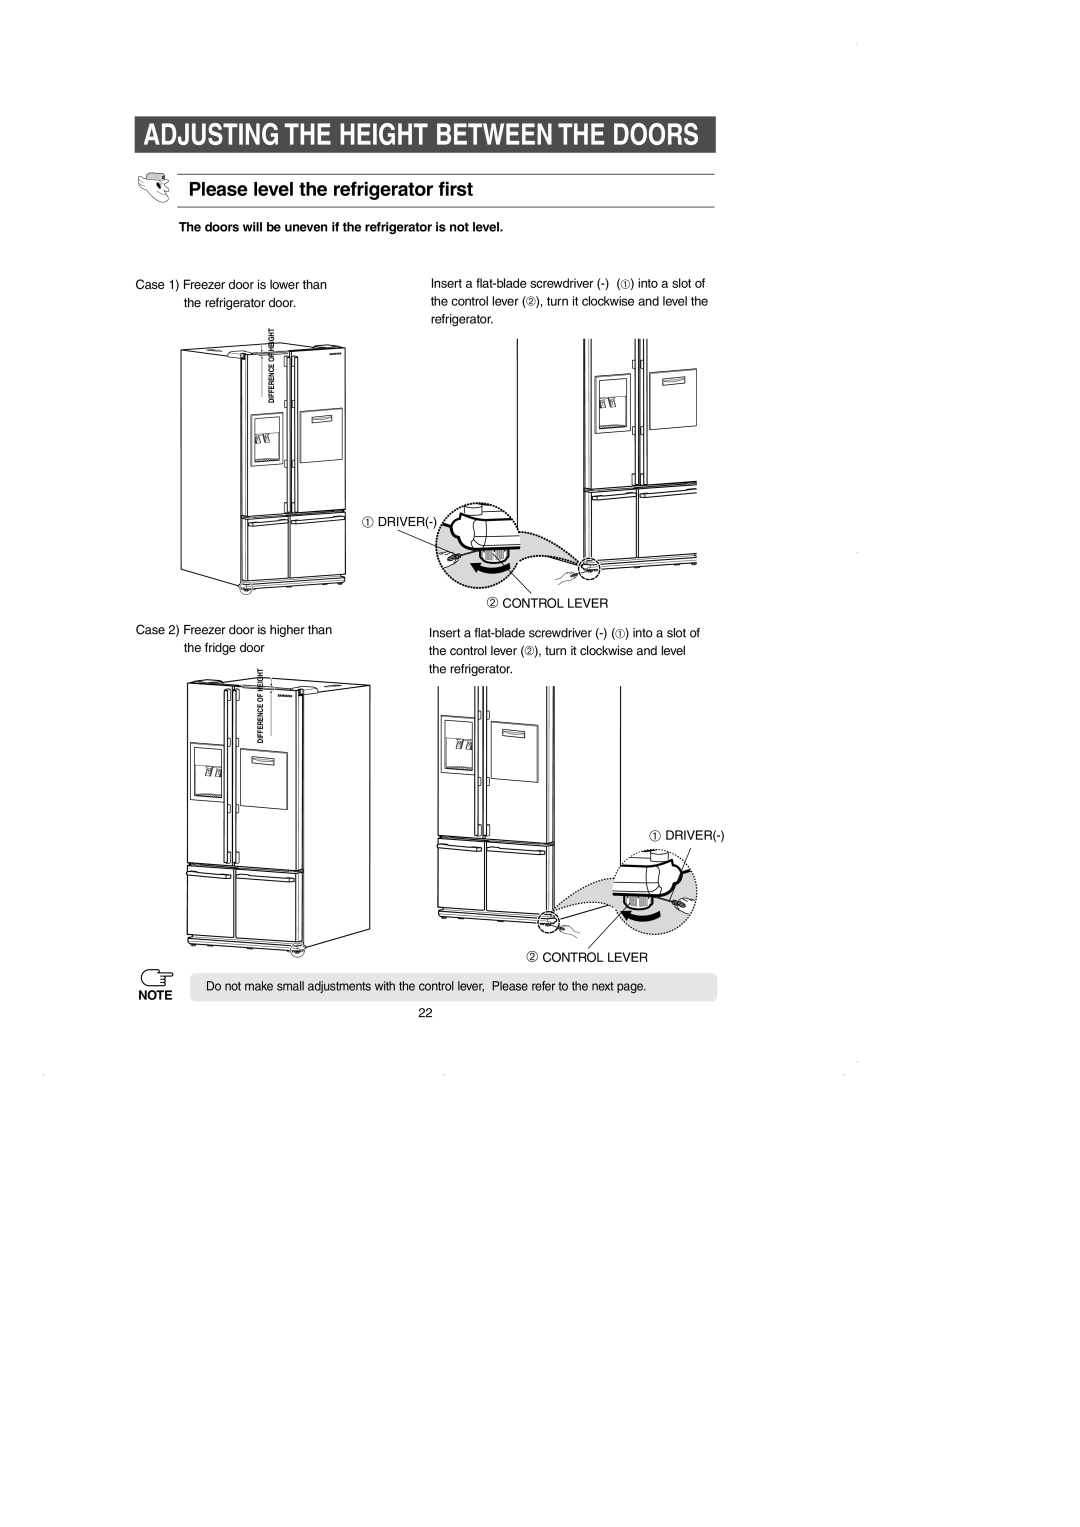 GE RM25 owner manual Please level the refrigerator first, Adjusting The Height Between The Doors, Difference Of Height 